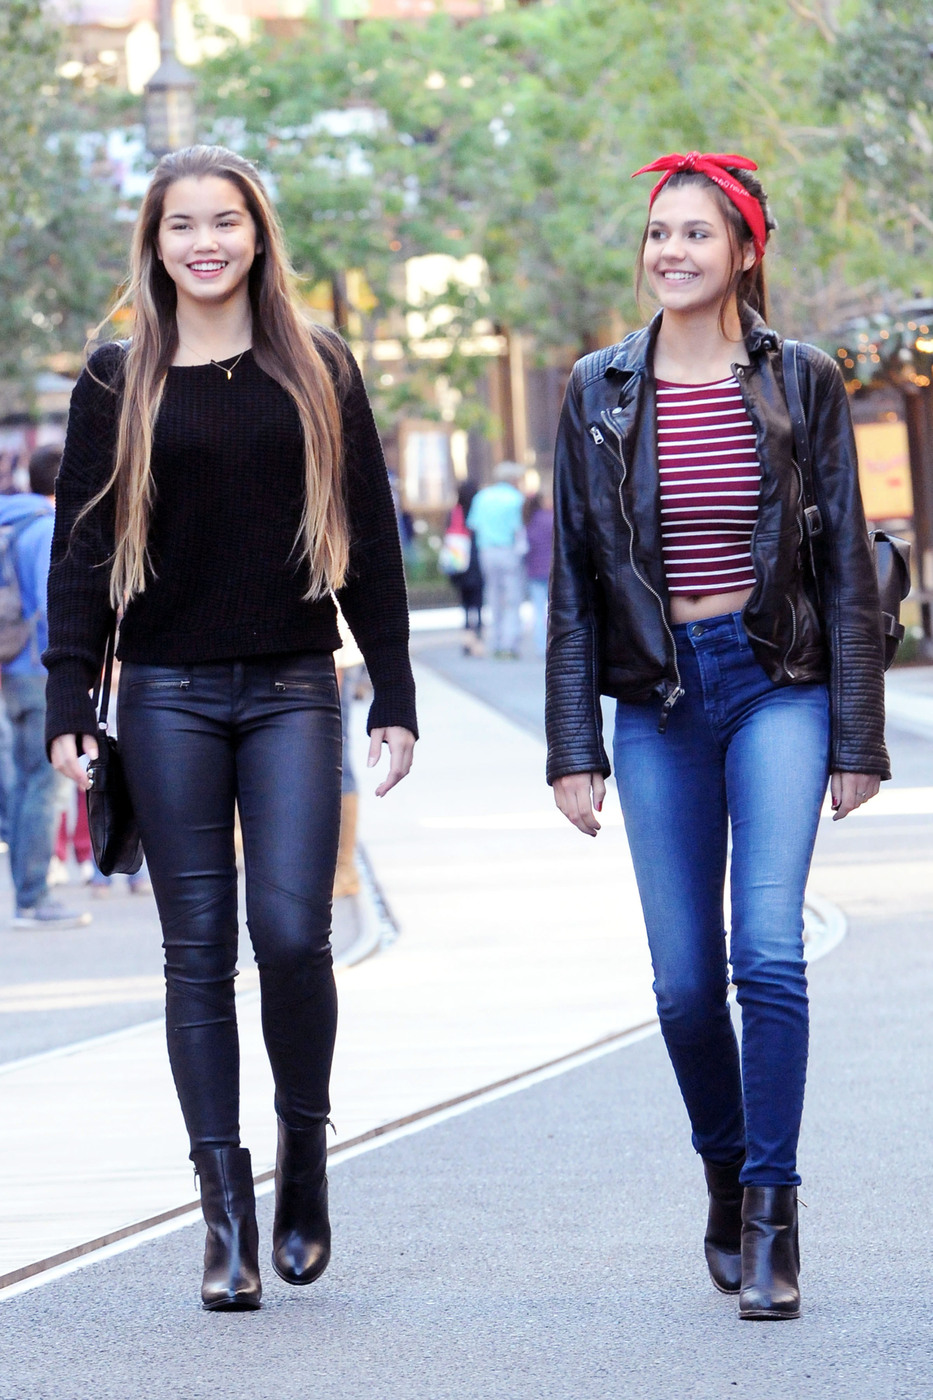 Paris Berelc spotted doing some holiday shopping at the Americana